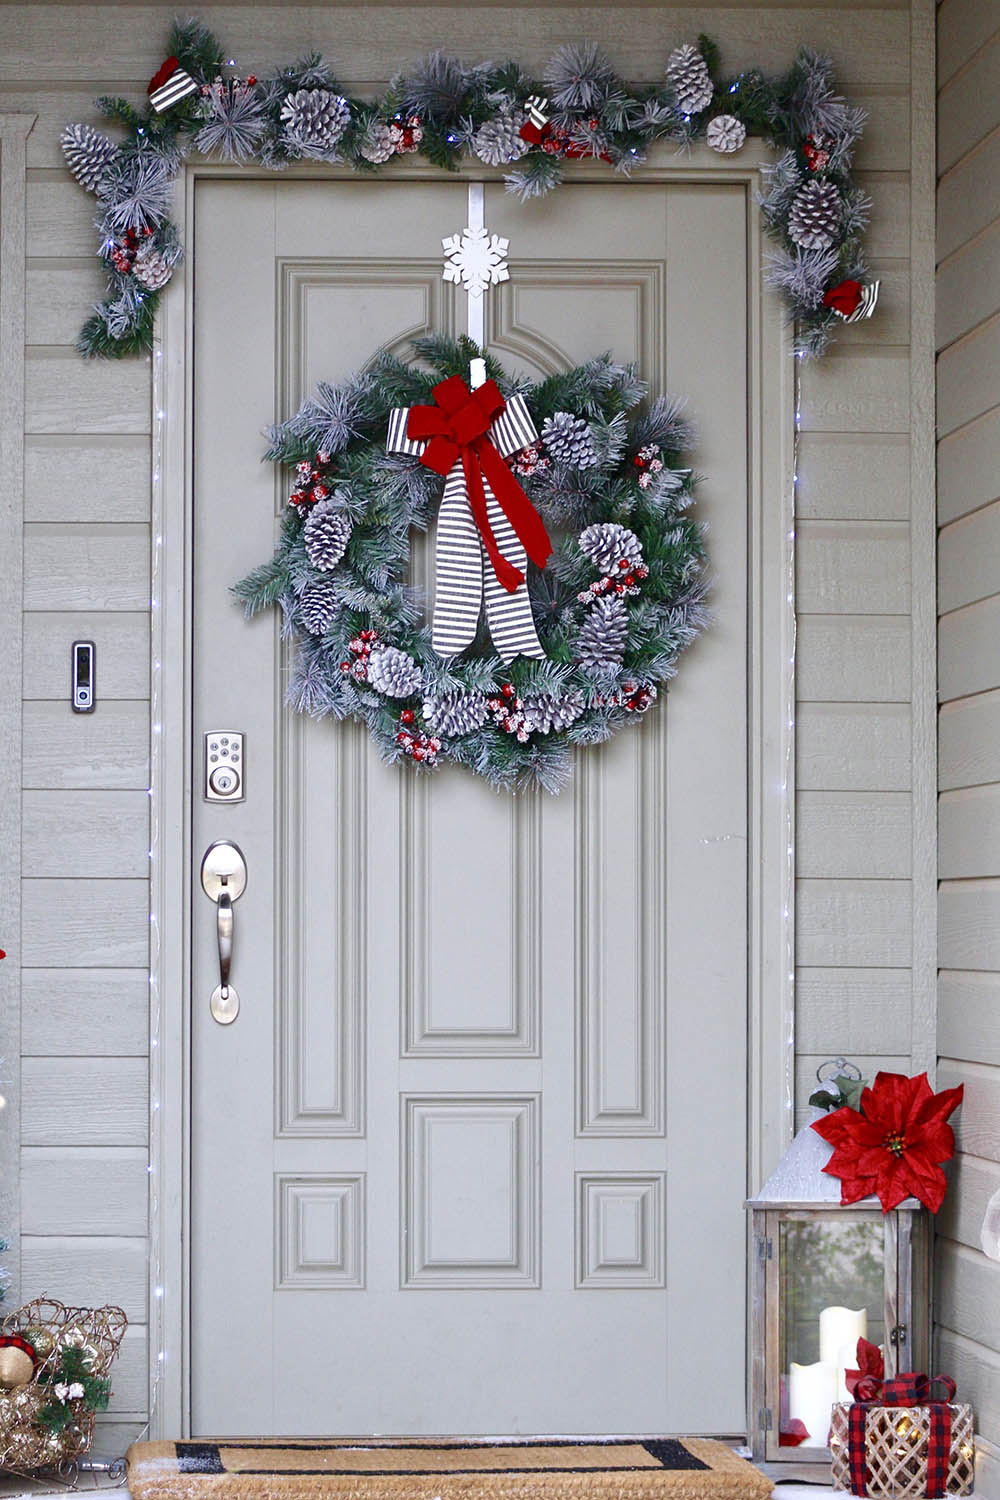 A wreath and garland with pinecones and bows decorates a front door for Christmas.